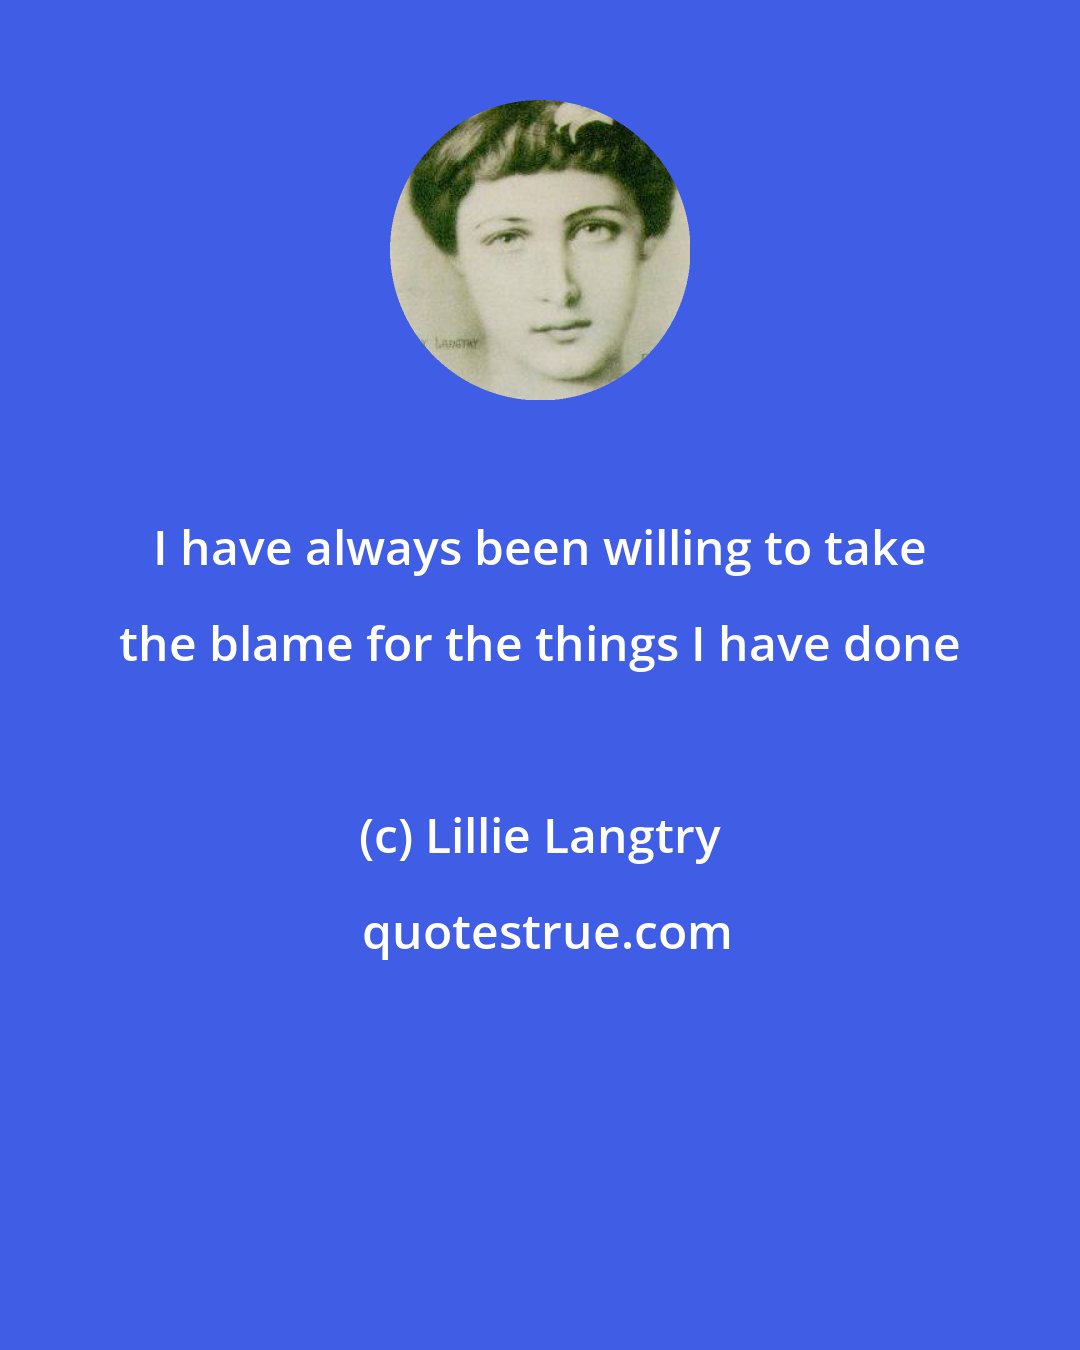 Lillie Langtry: I have always been willing to take the blame for the things I have done